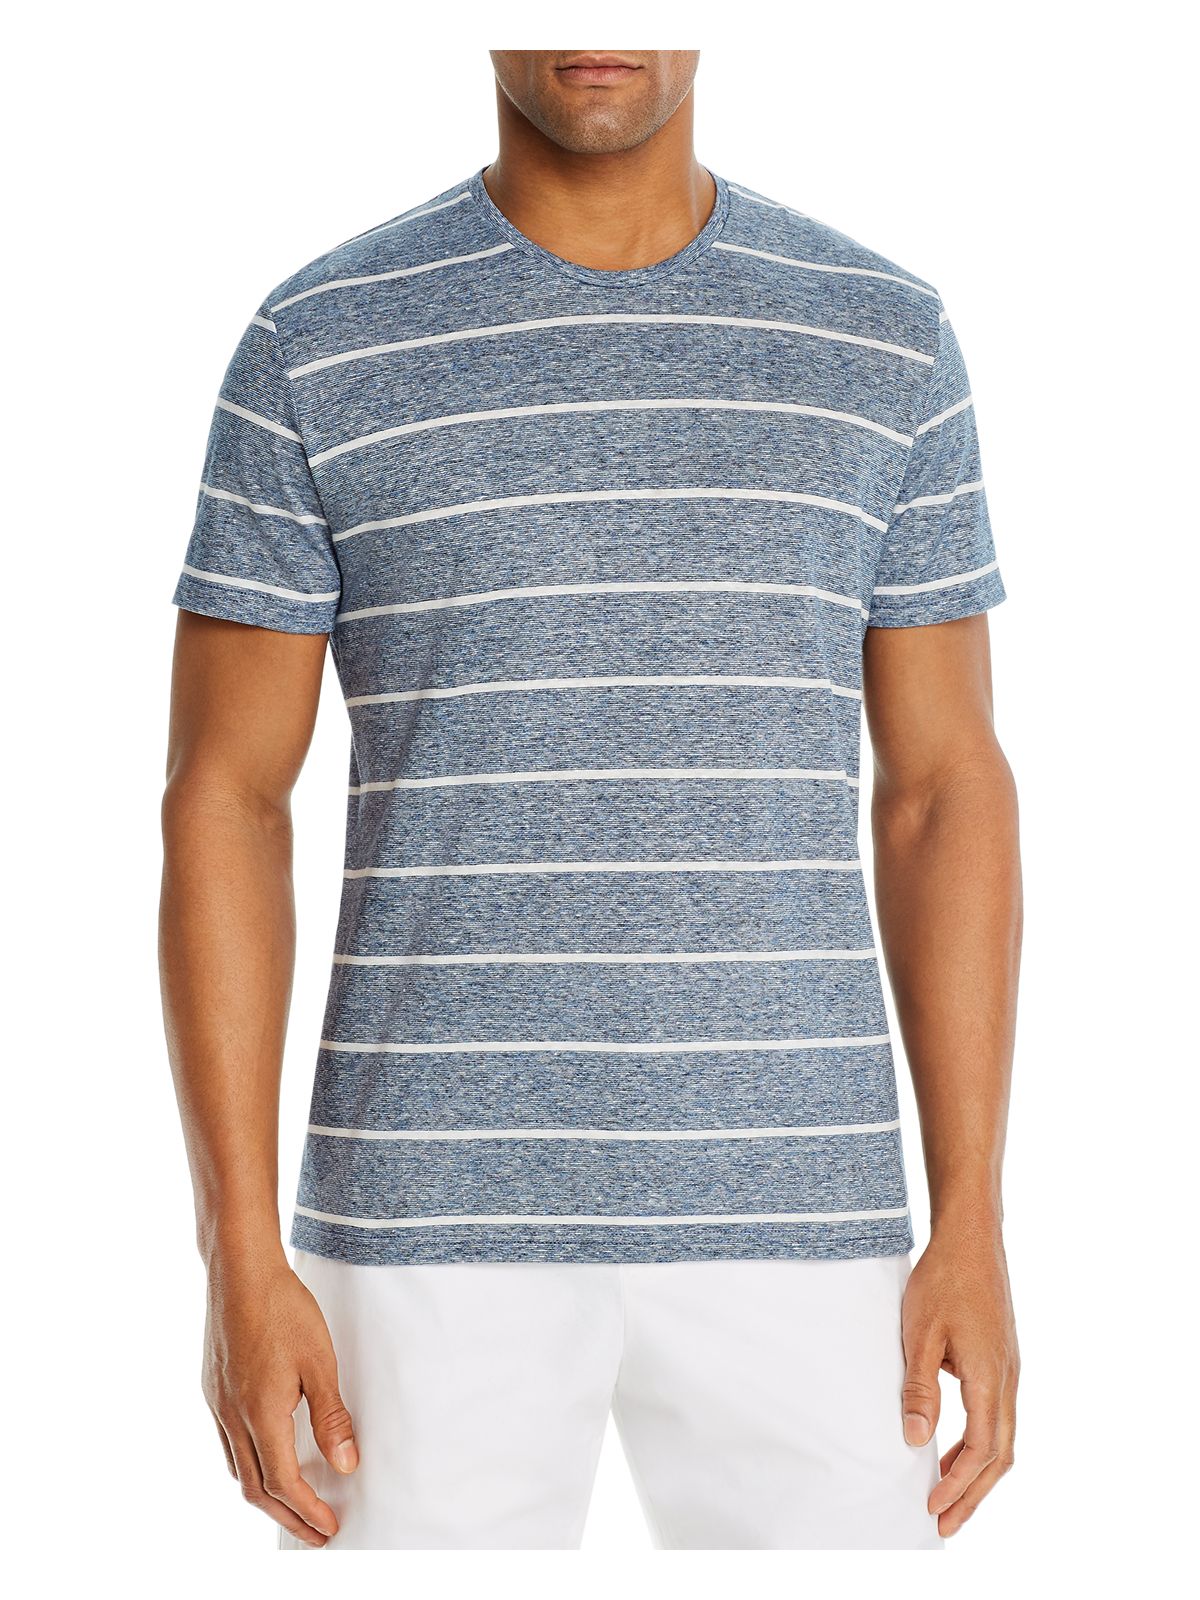 DYLAN GRAY Mens Blue Striped Casual Shirt S